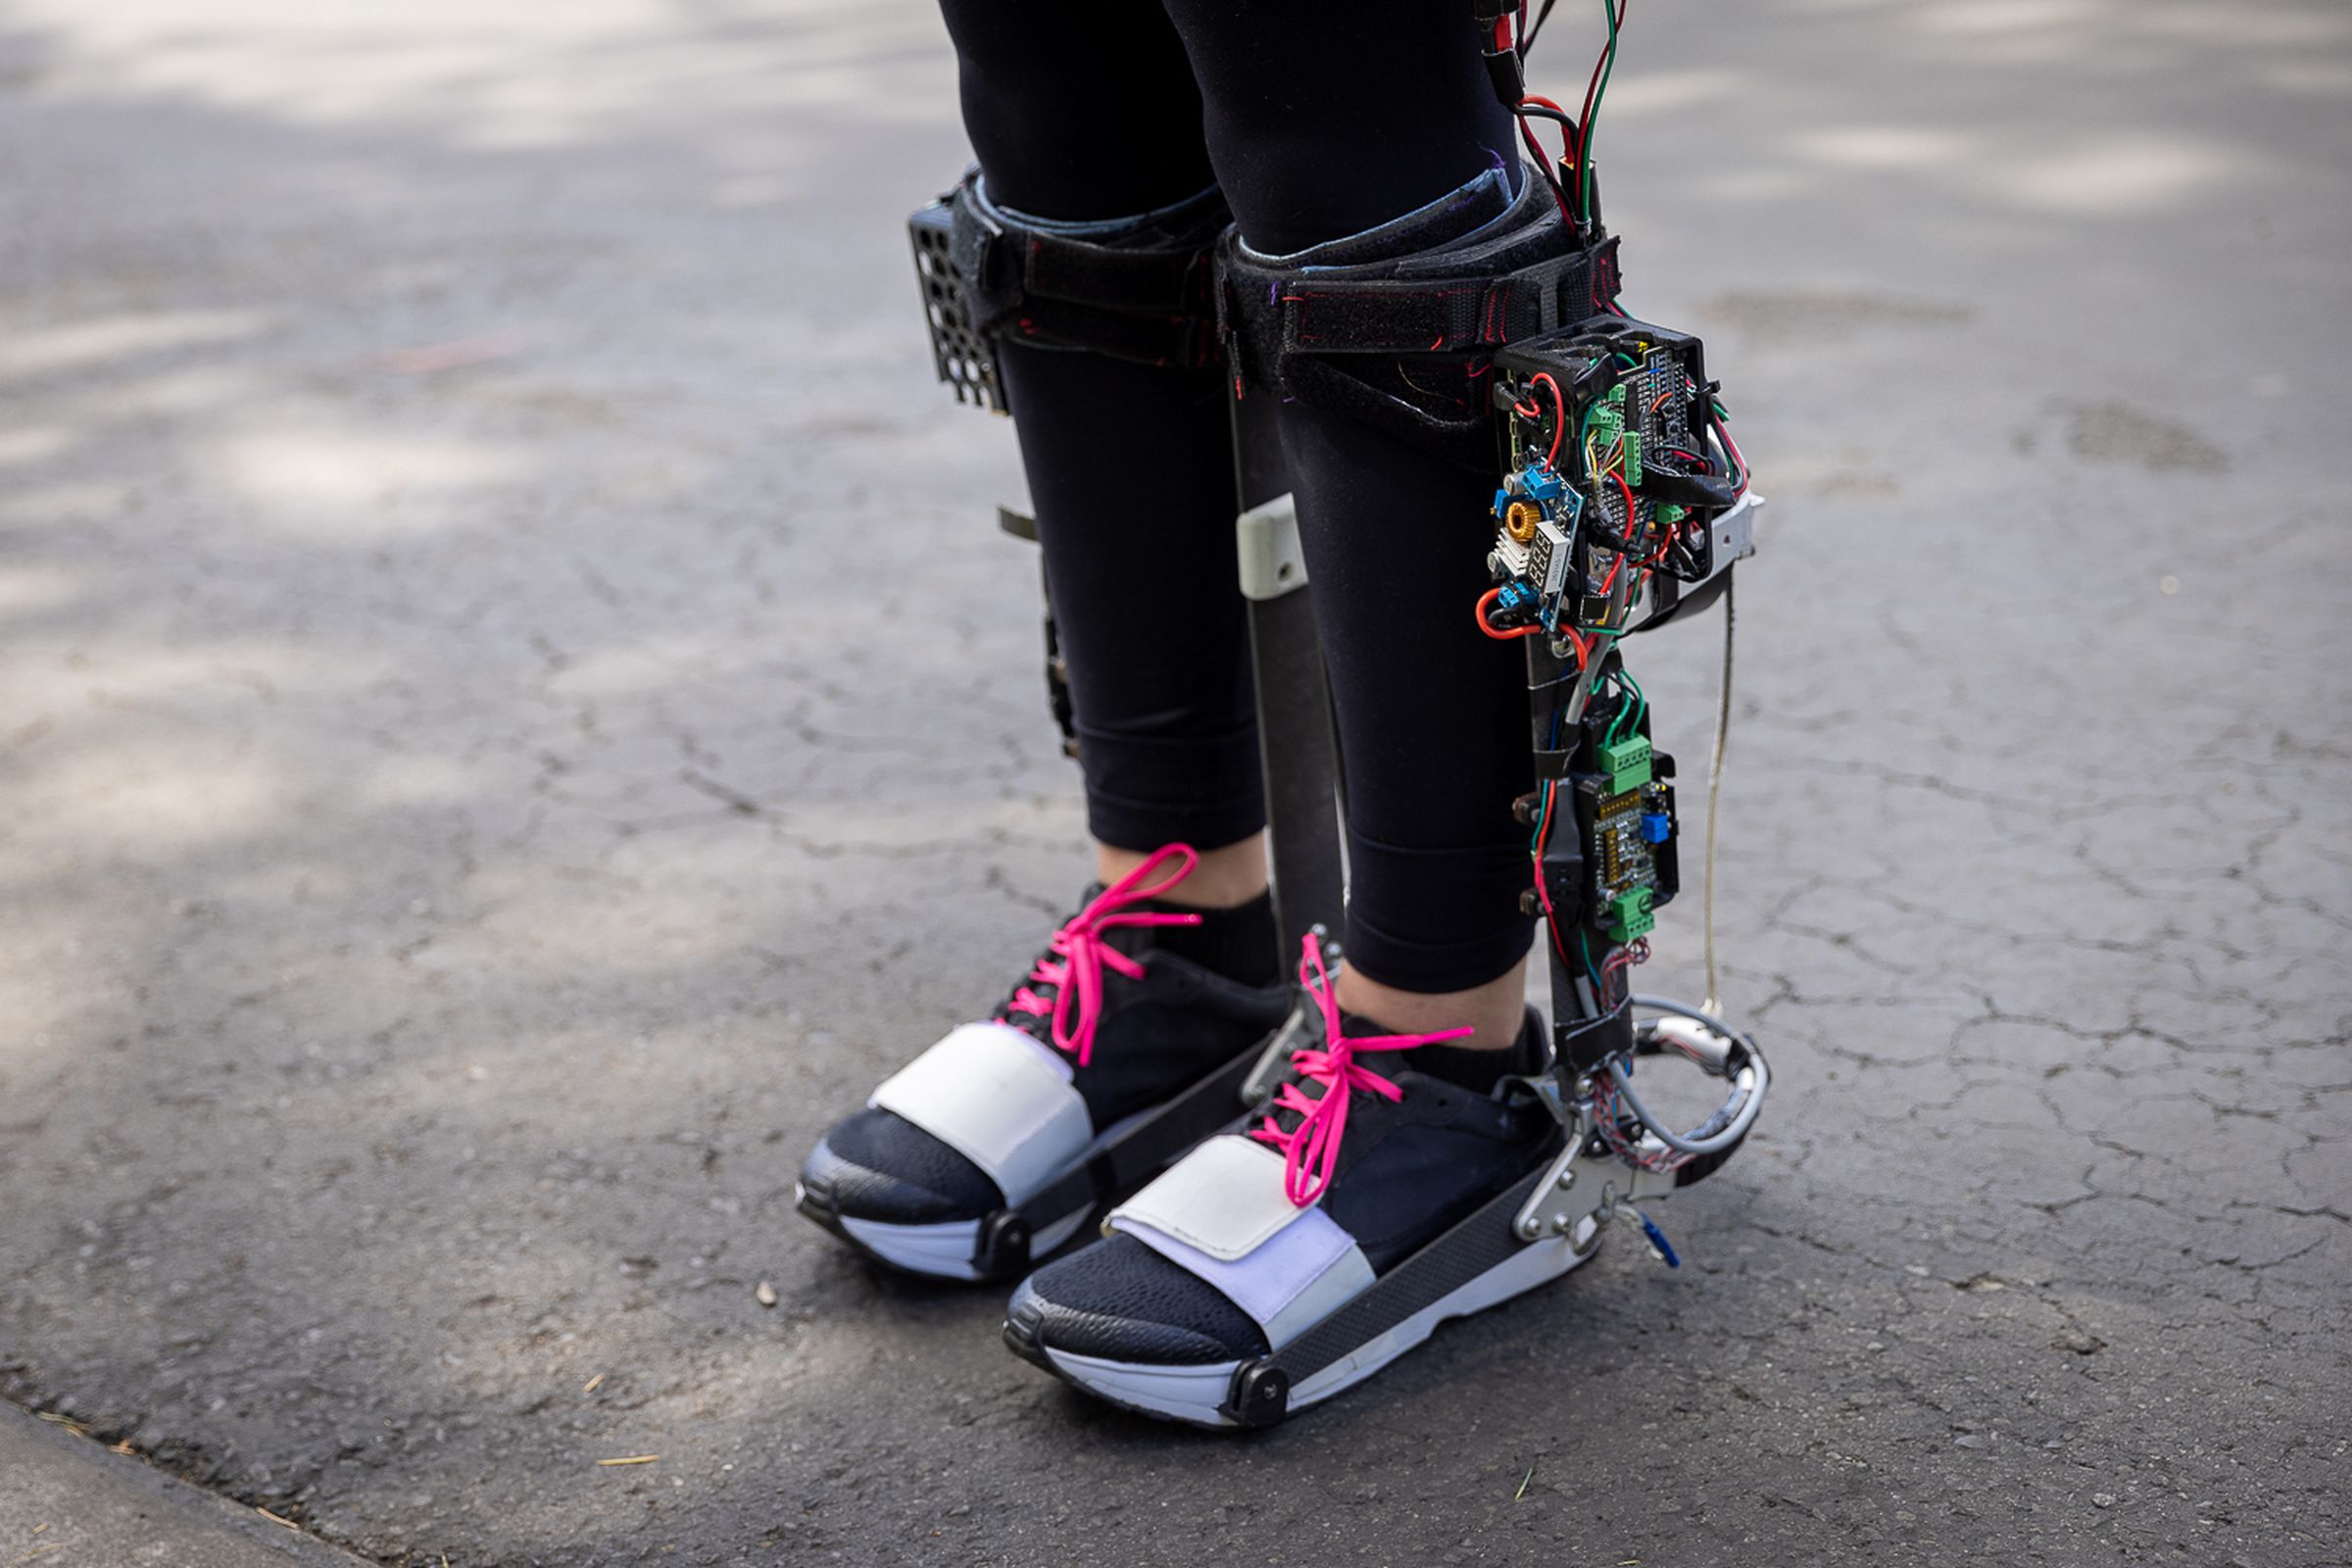 An image of someone’s legs from the knee down with a robotic exoskeleton attached at the feet and below the knee. The exoskeleton is exposed, colorful wires and circuit boards.